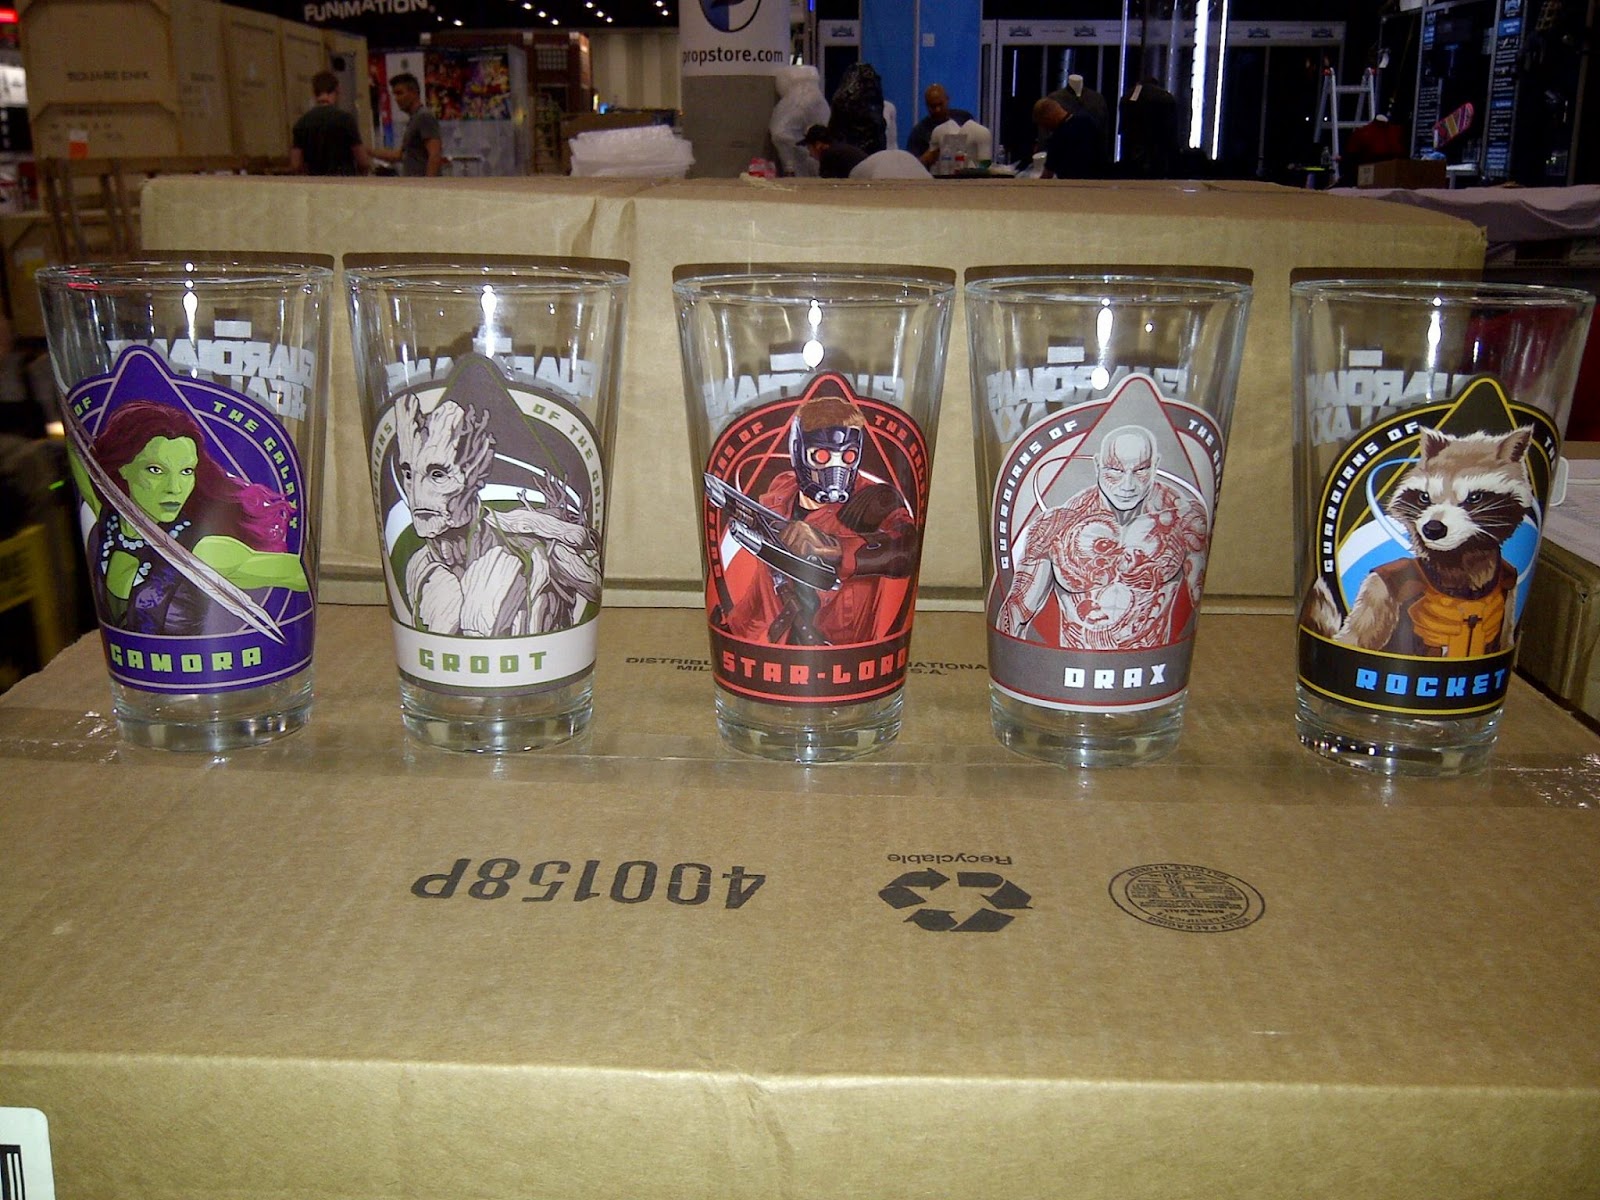 San Diego Comic-Con 2014 Exclusive Guardians of the Galaxy Toon Tumbler Pint Glasses by Marvel & PopFun